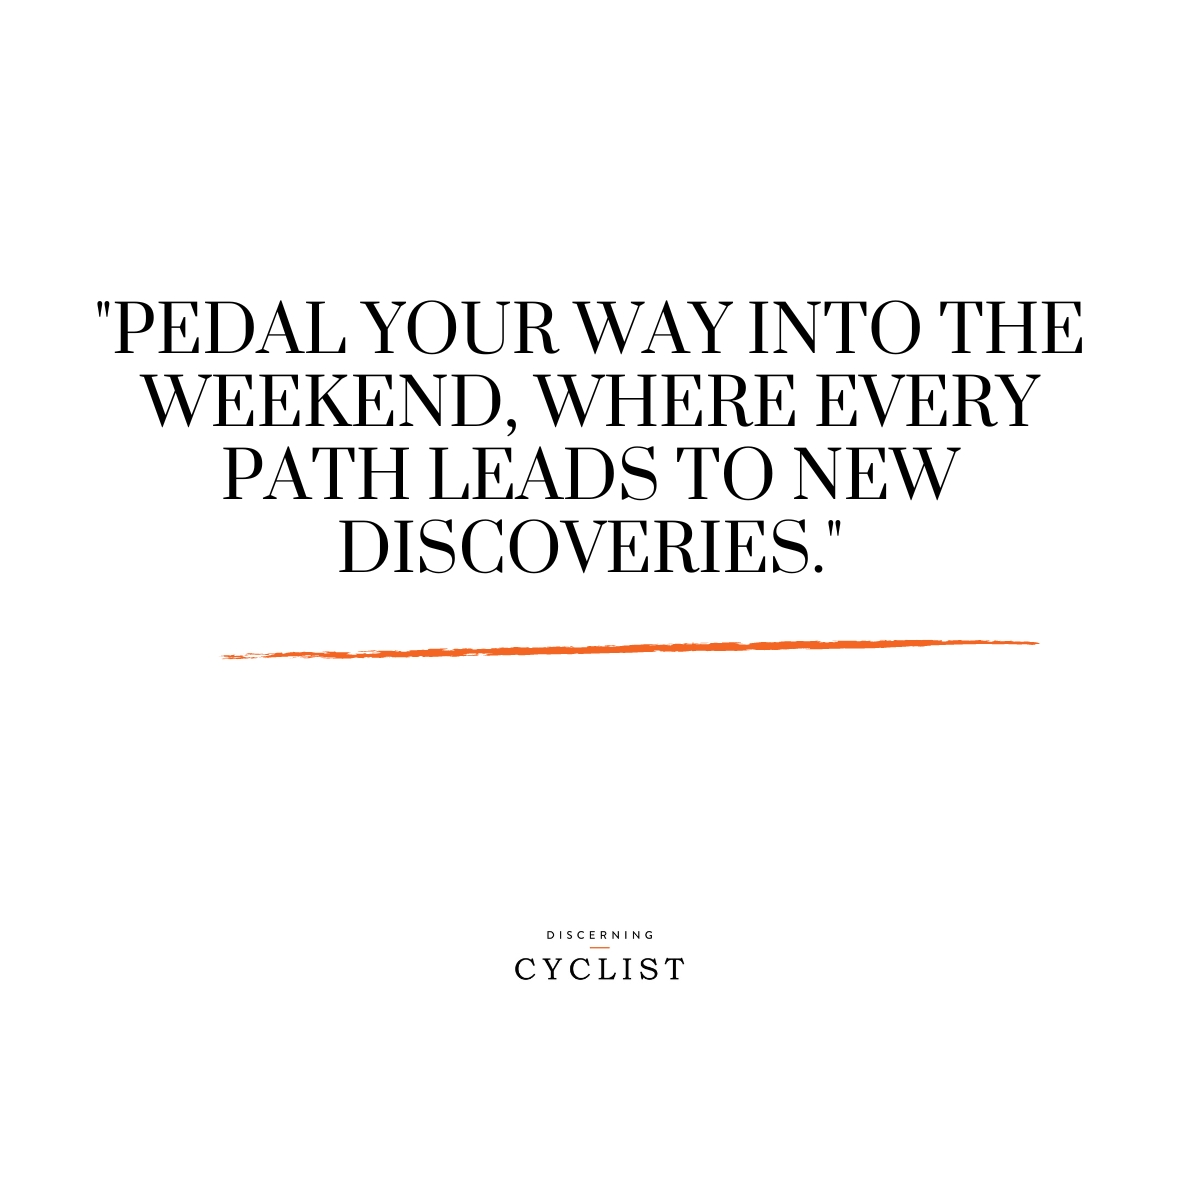 "Pedal your way into the weekend, where every path leads to new discoveries."